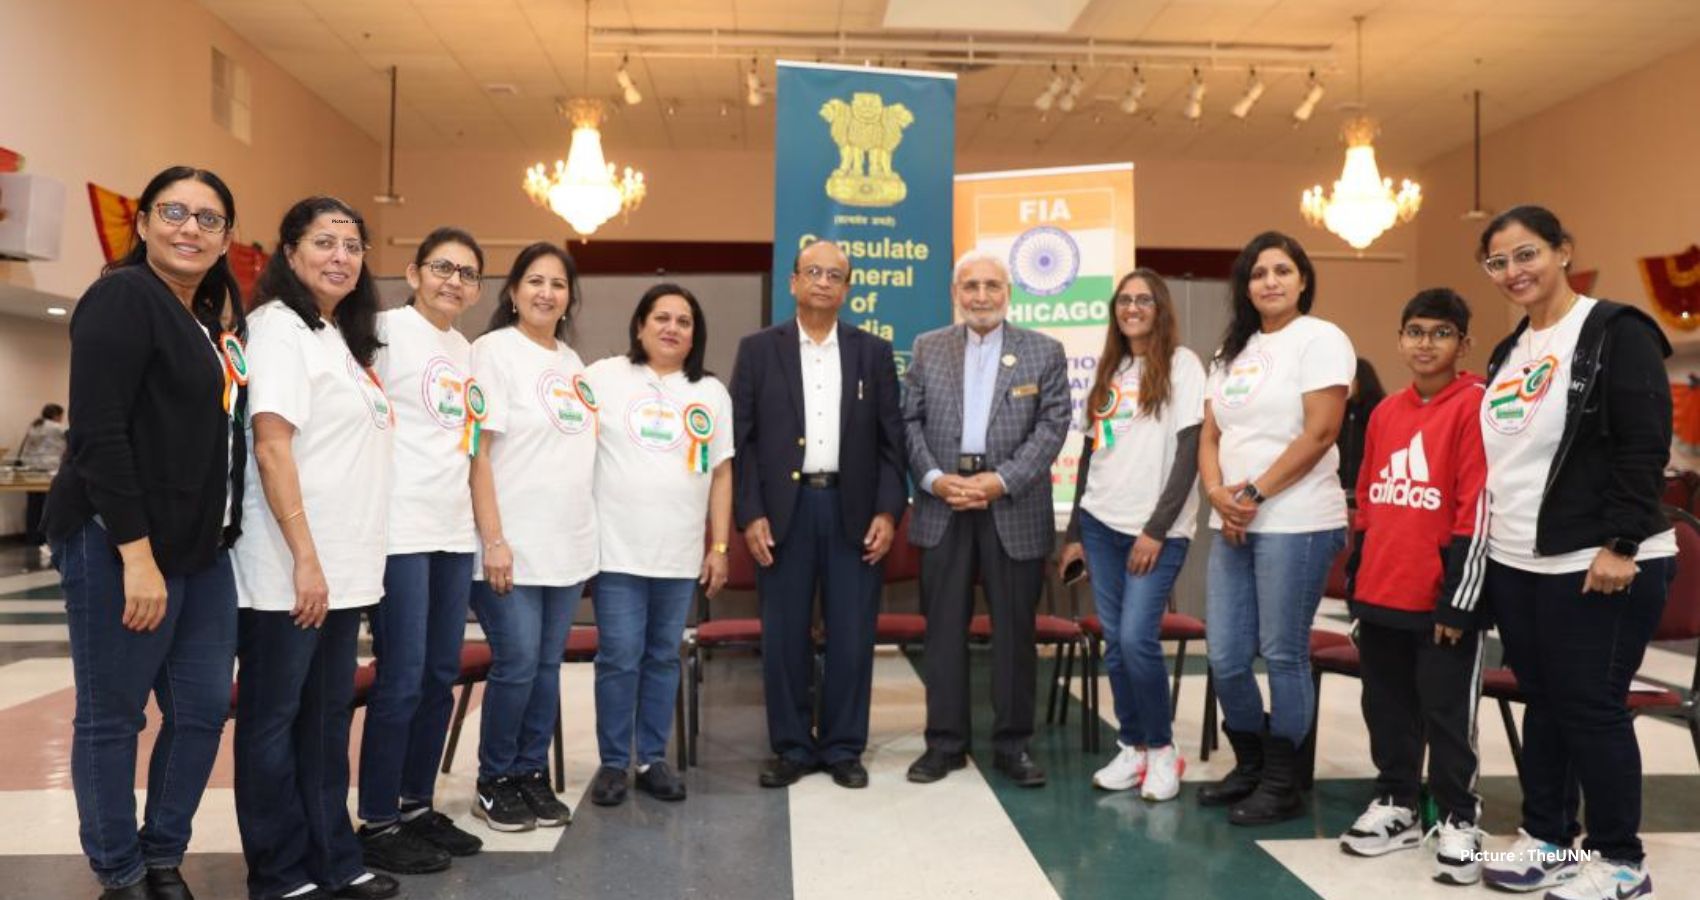 Featured & Cover FIA Chicago and Indian Consulate Hold OCI Camp 2